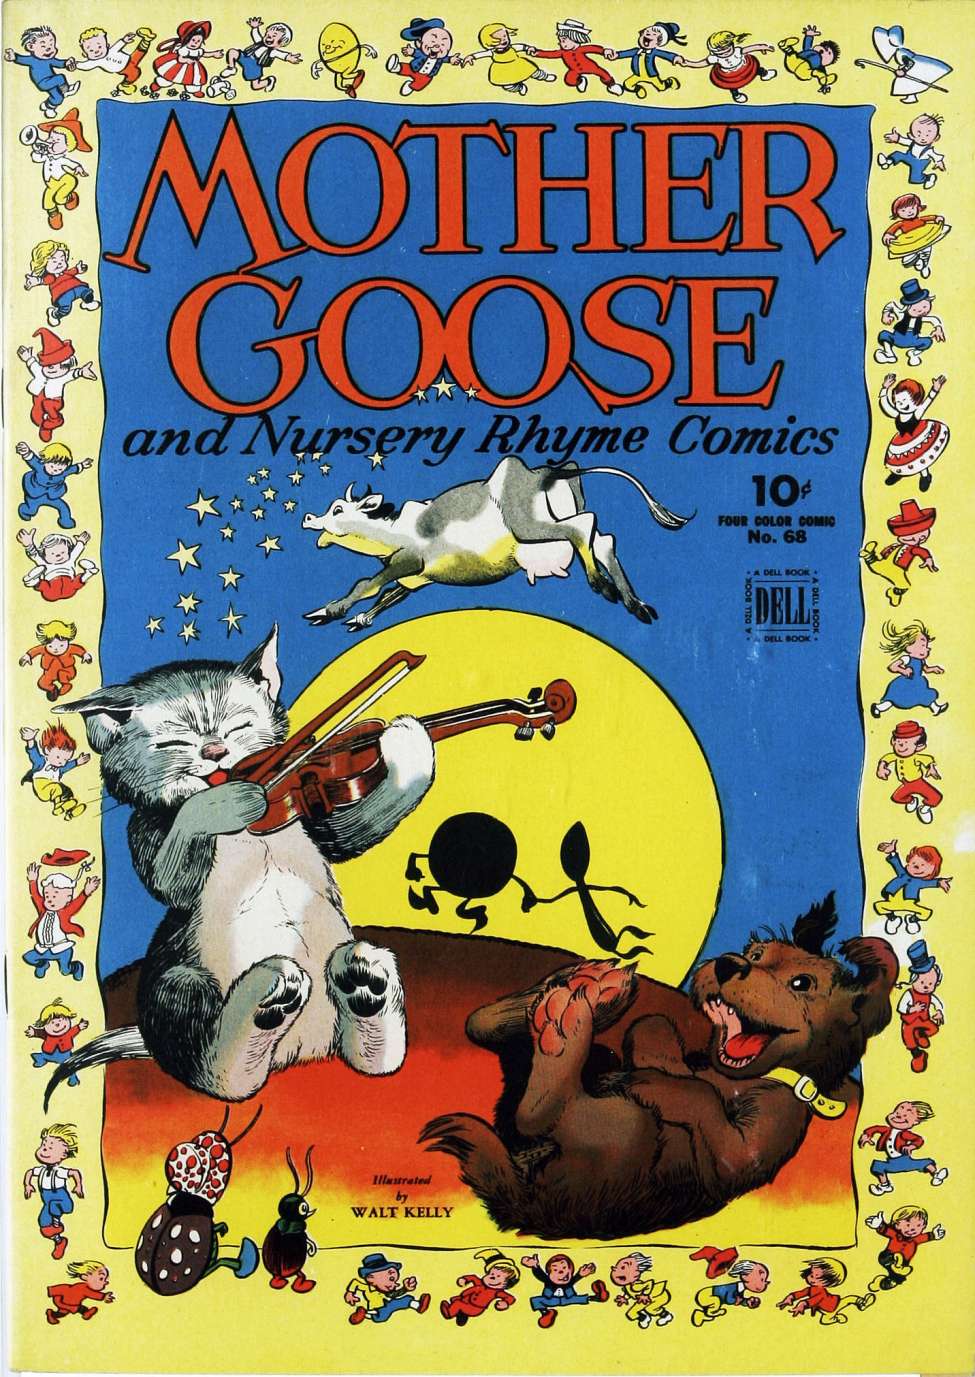 Book Cover For 0068 - Mother Goose